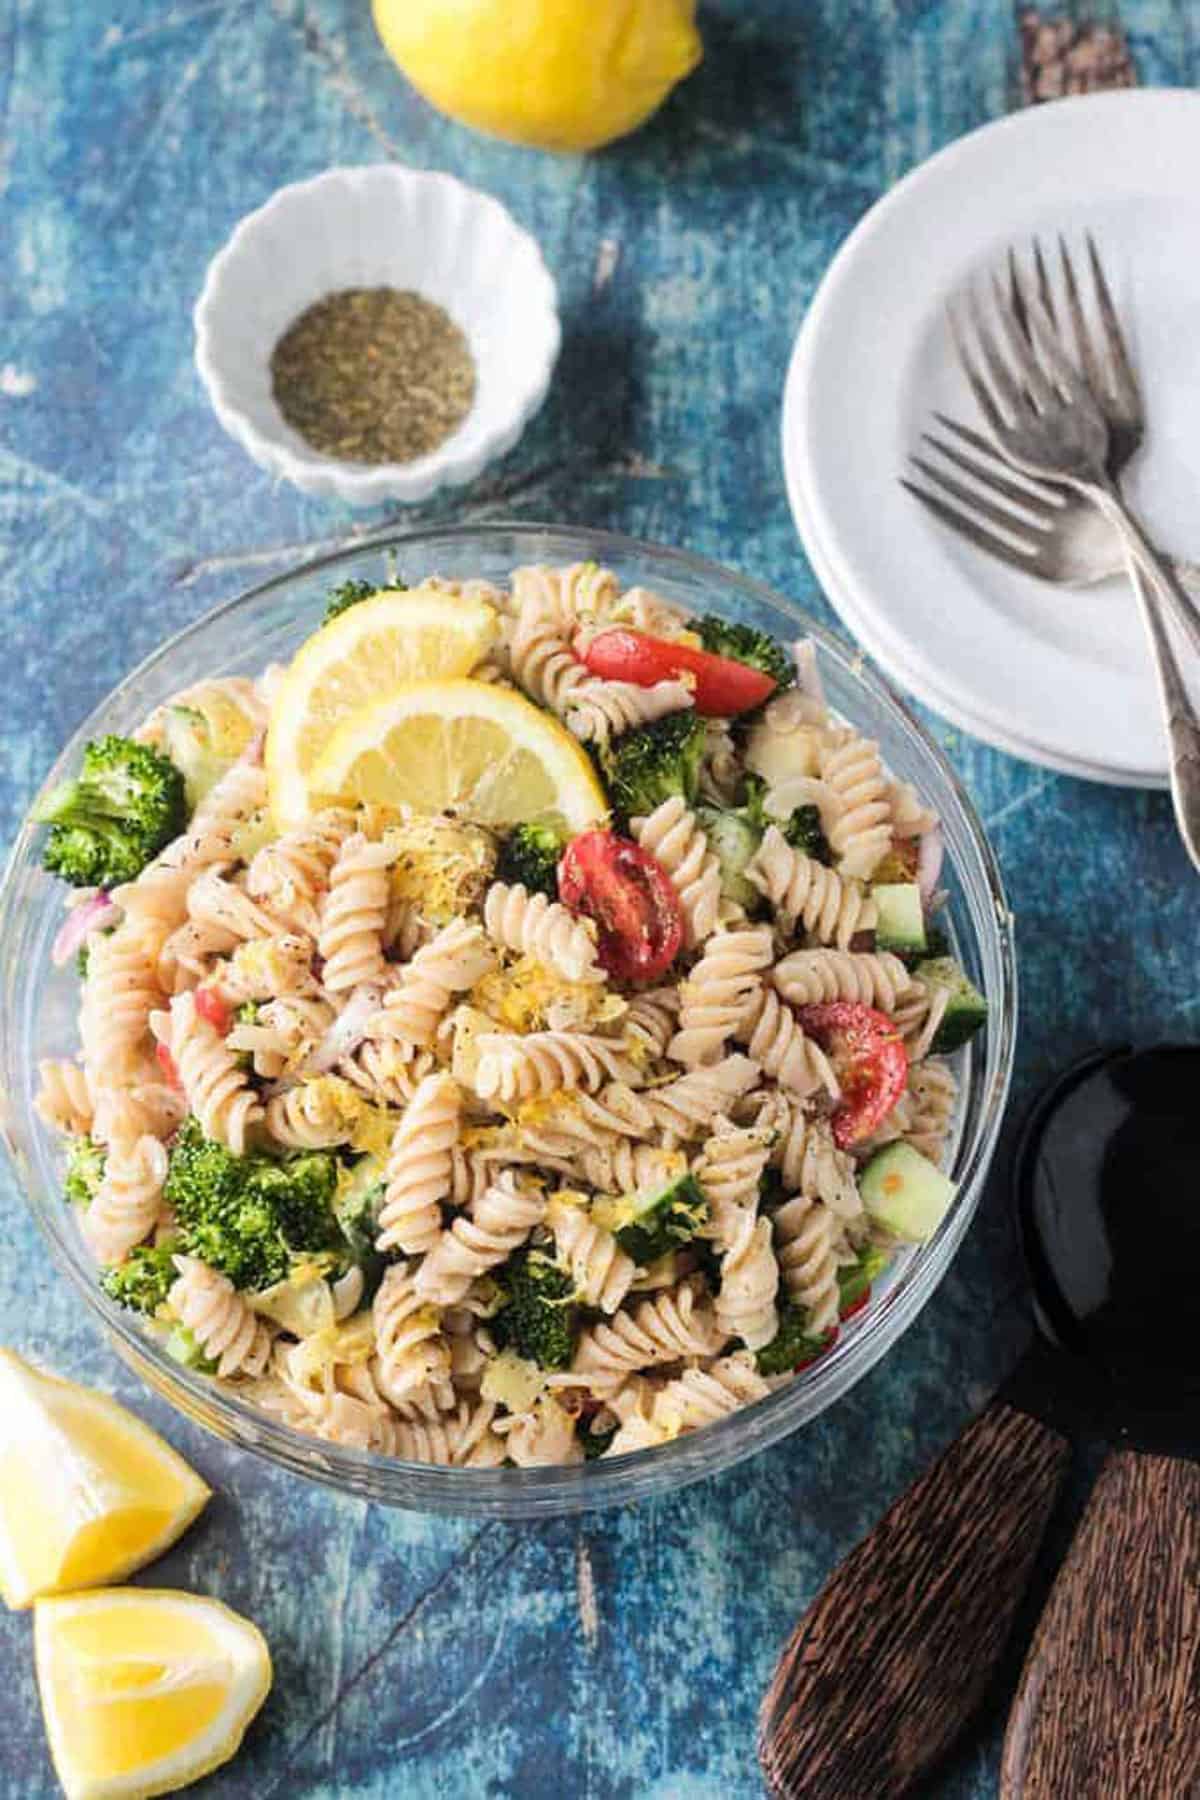 Bowl of vegan pasta salad with rotini noodles, broccoli, cucumber, artichokes, and tomatoes.